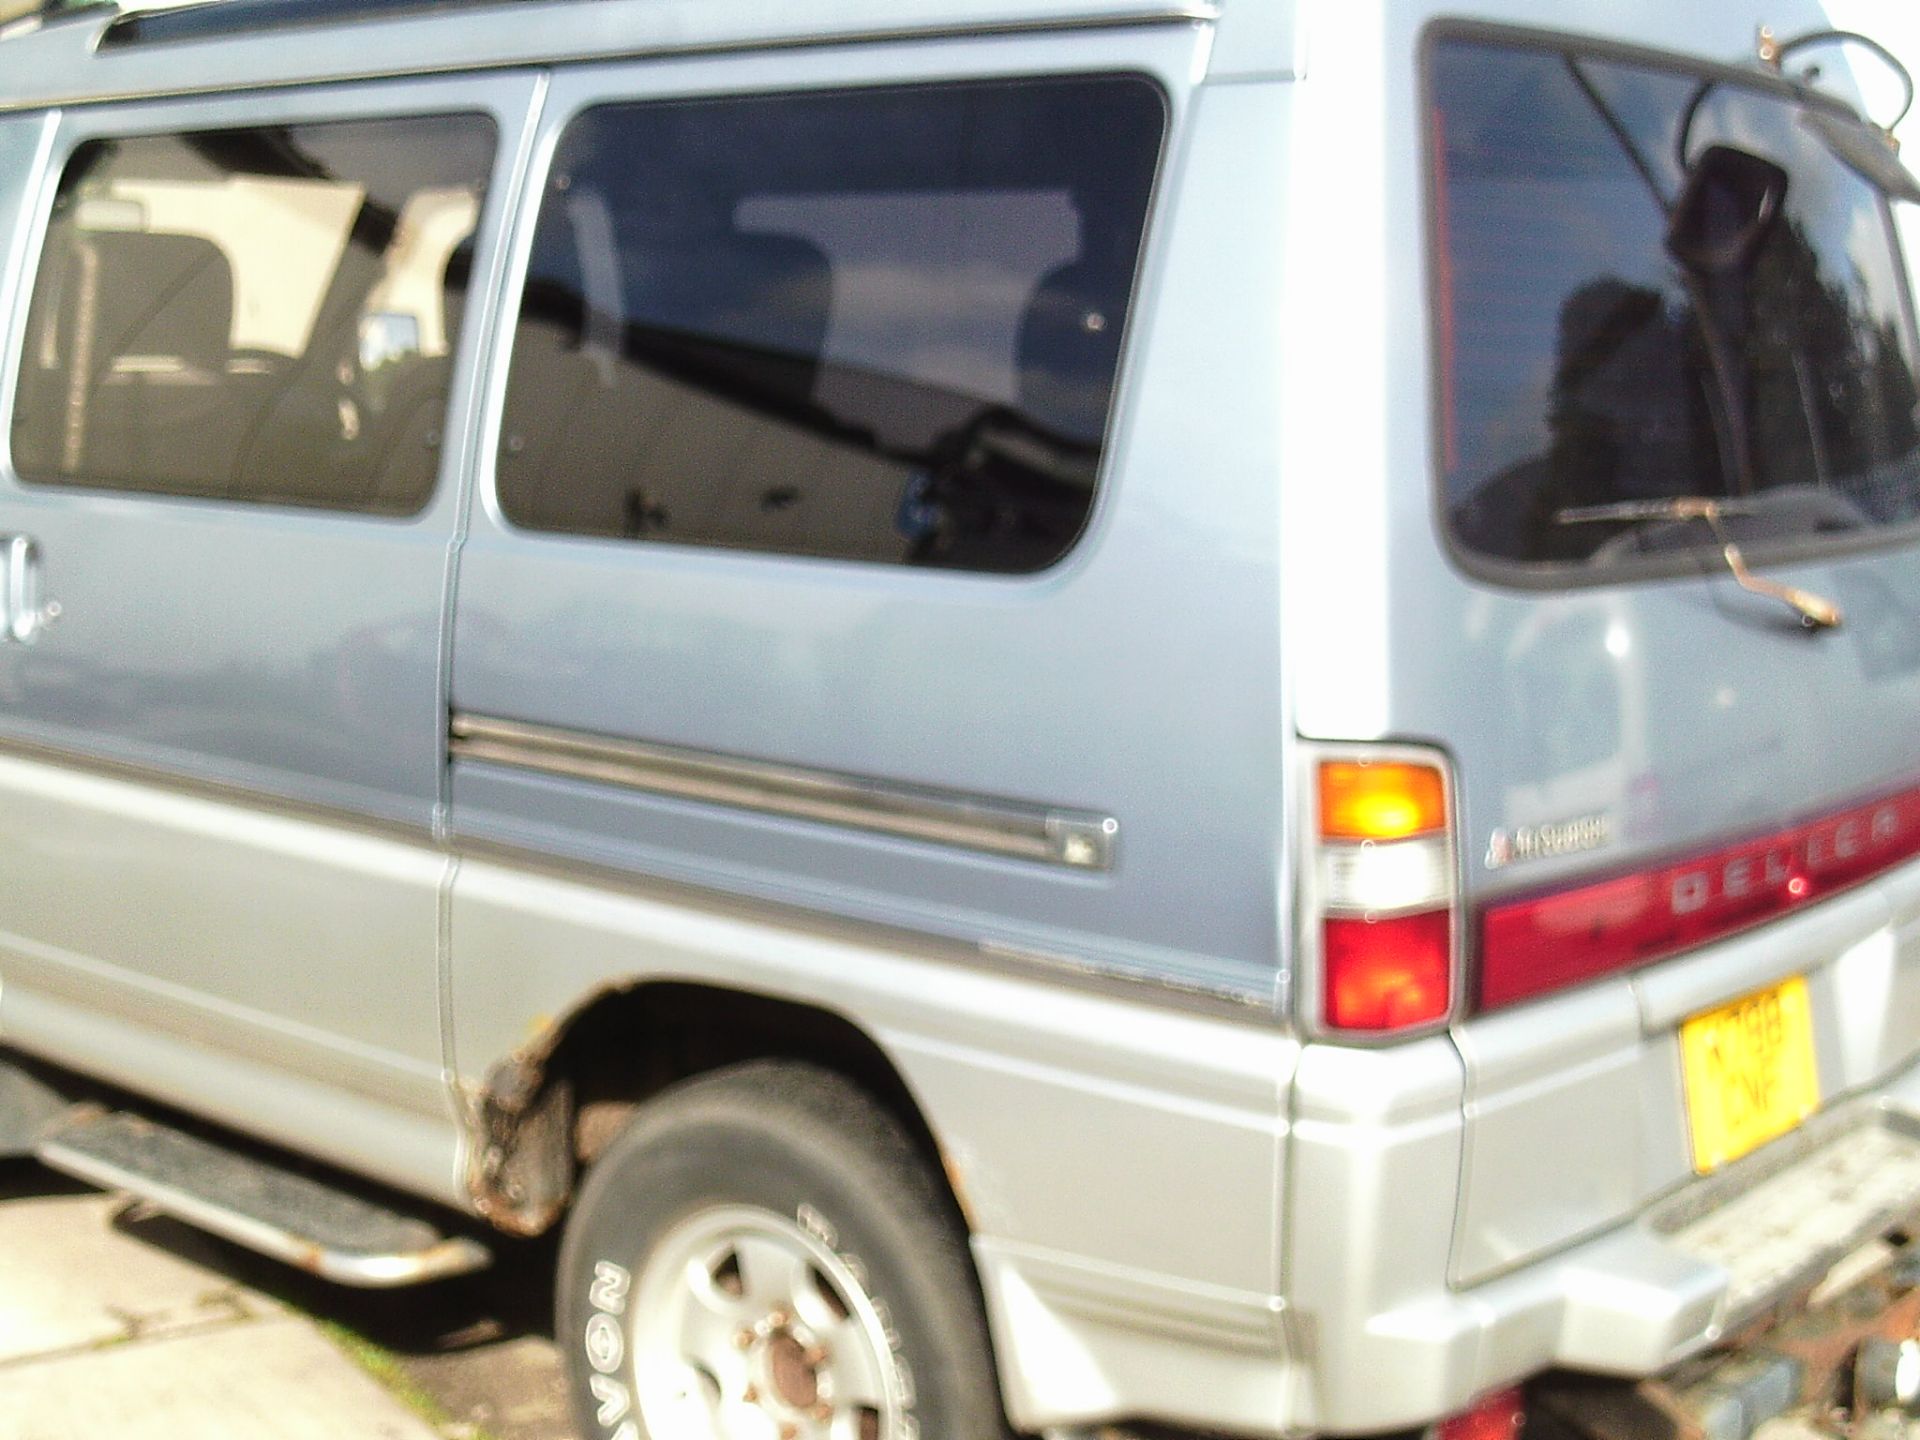 1993/K REG MITSUBISHI DELICA 4WD MPV 2.5 DIESEL FULLY RECONDITIONED ENGINE (WITH PAPERWORK) *NO VAT* - Image 3 of 20